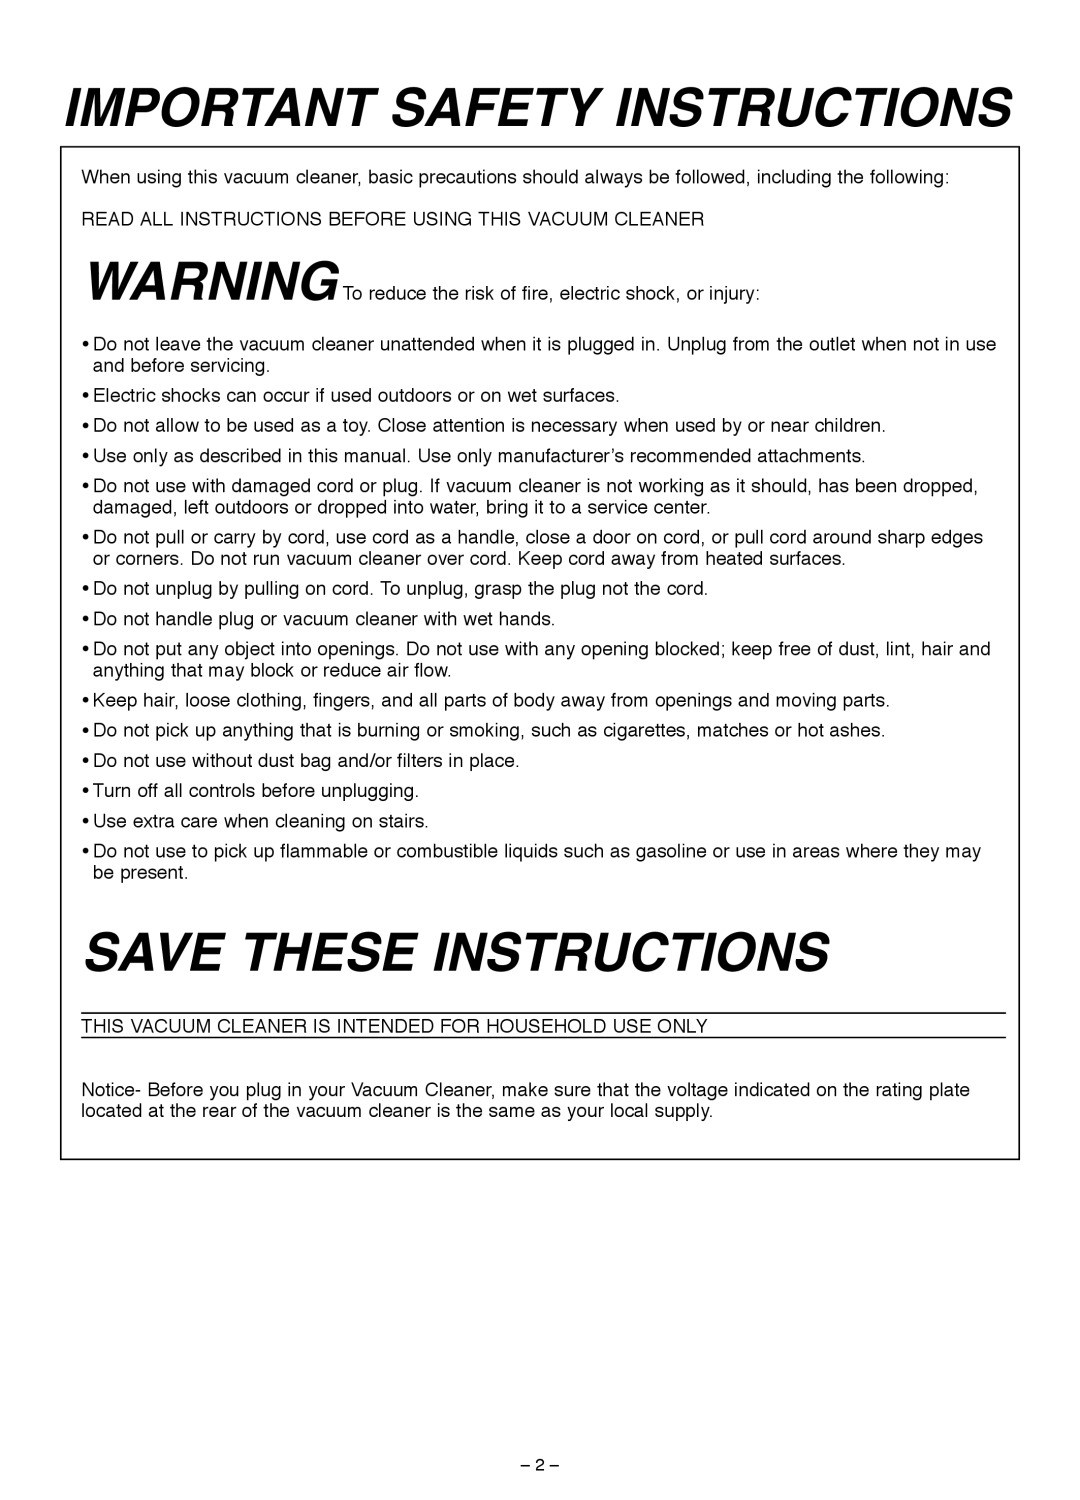 Miele S185 important safety instructions Important Safety Instructions, Save These Instructions 